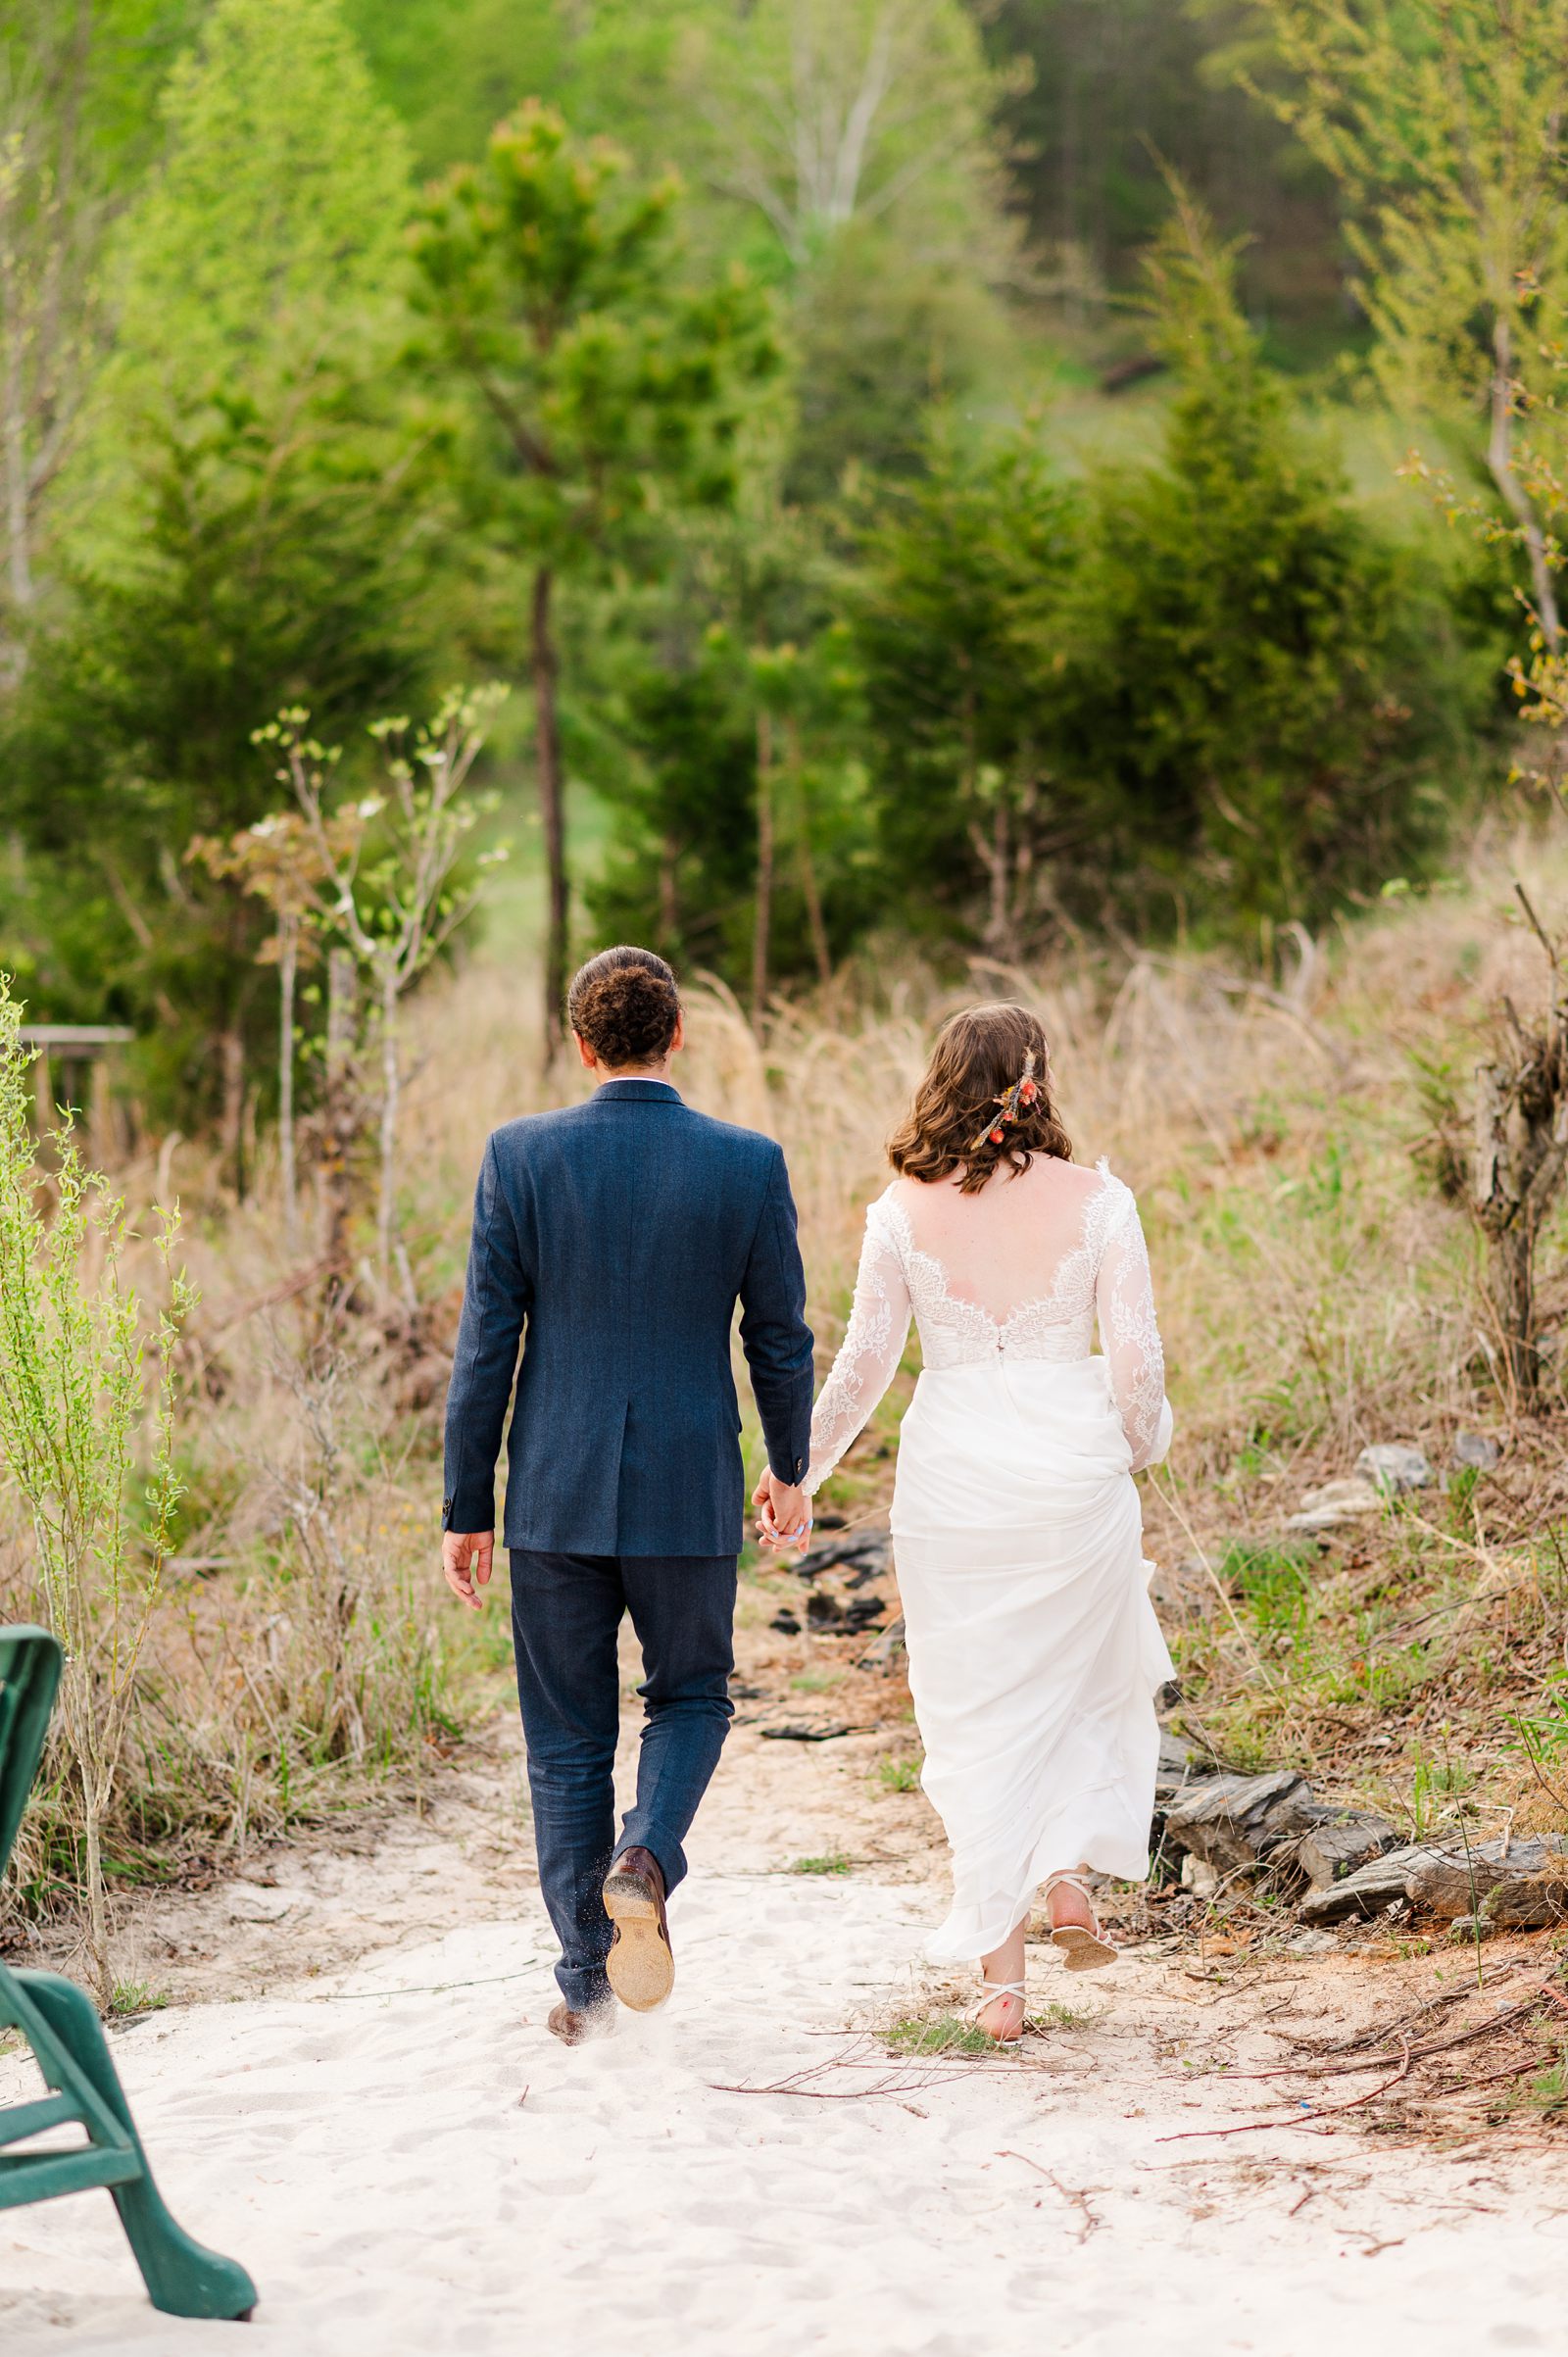 Fun Bride and Groom Portraits with Fun Virginia Wedding Photographer Kailey Brianne Photography